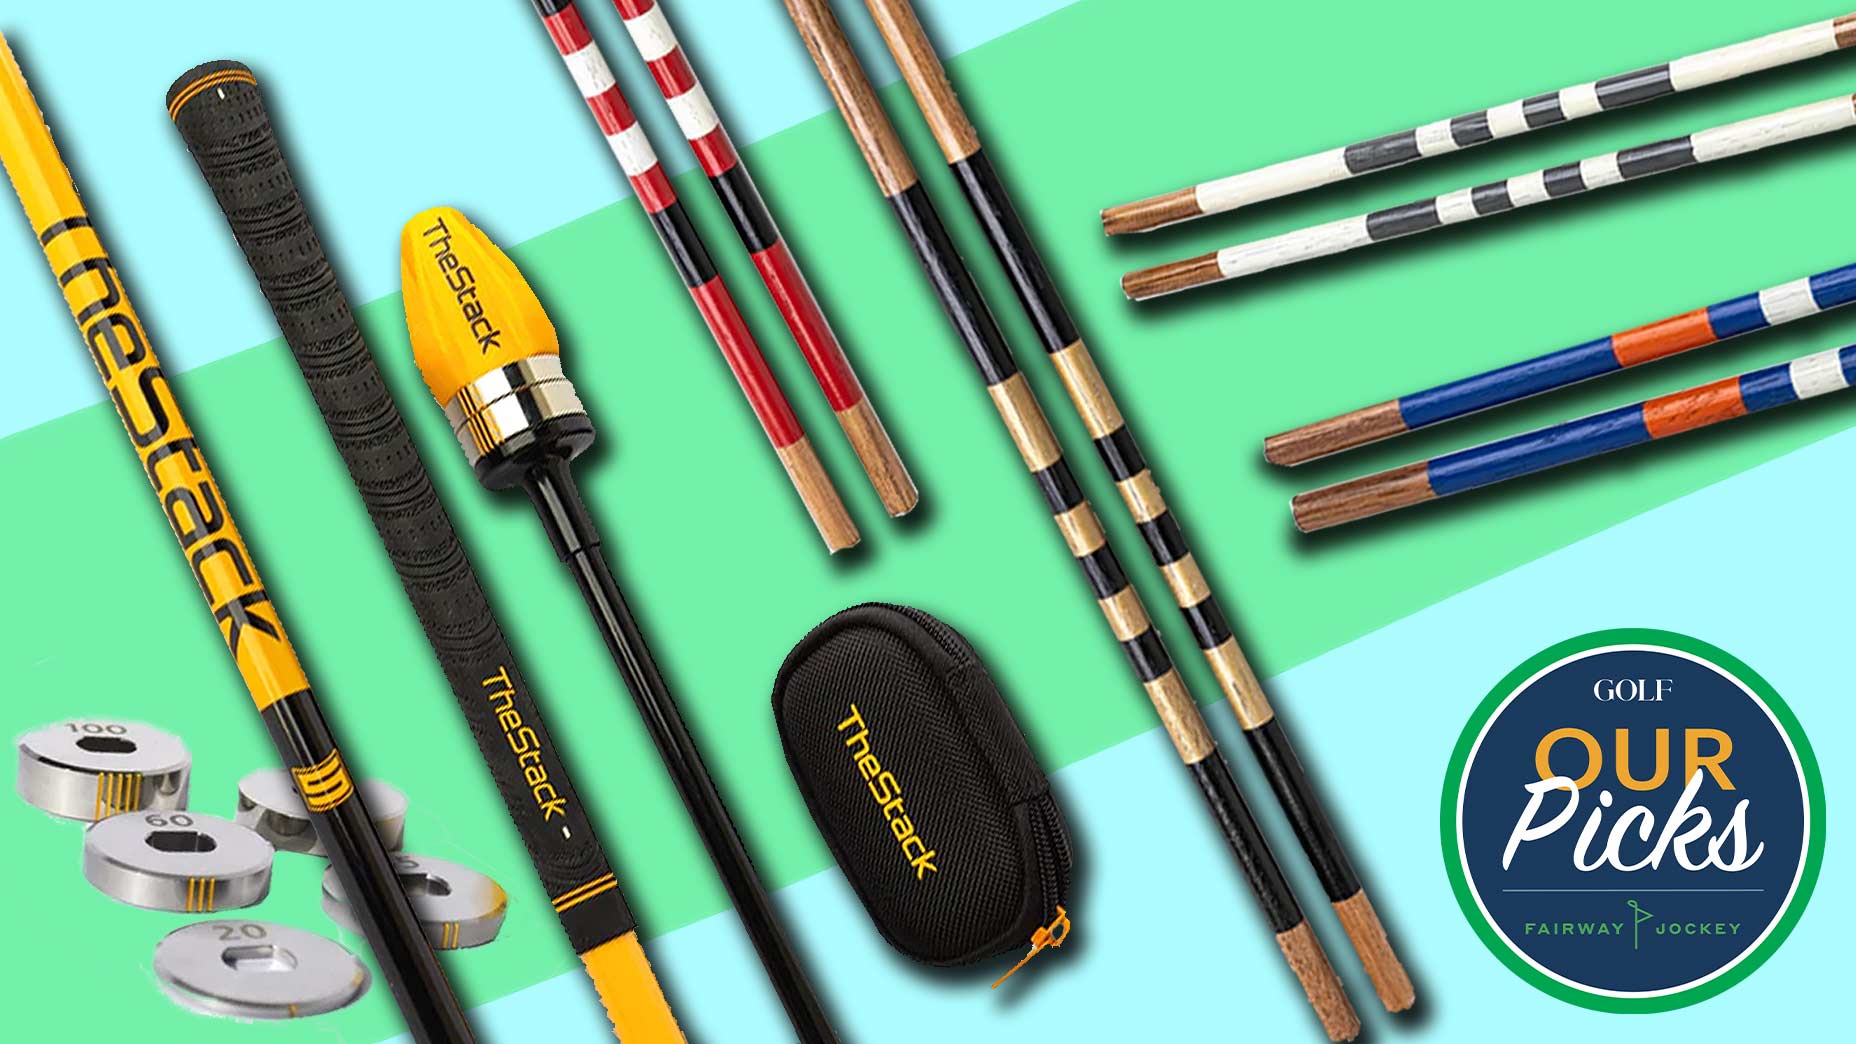 2 GOLF staff favorite training aids of 2023: Our Picks